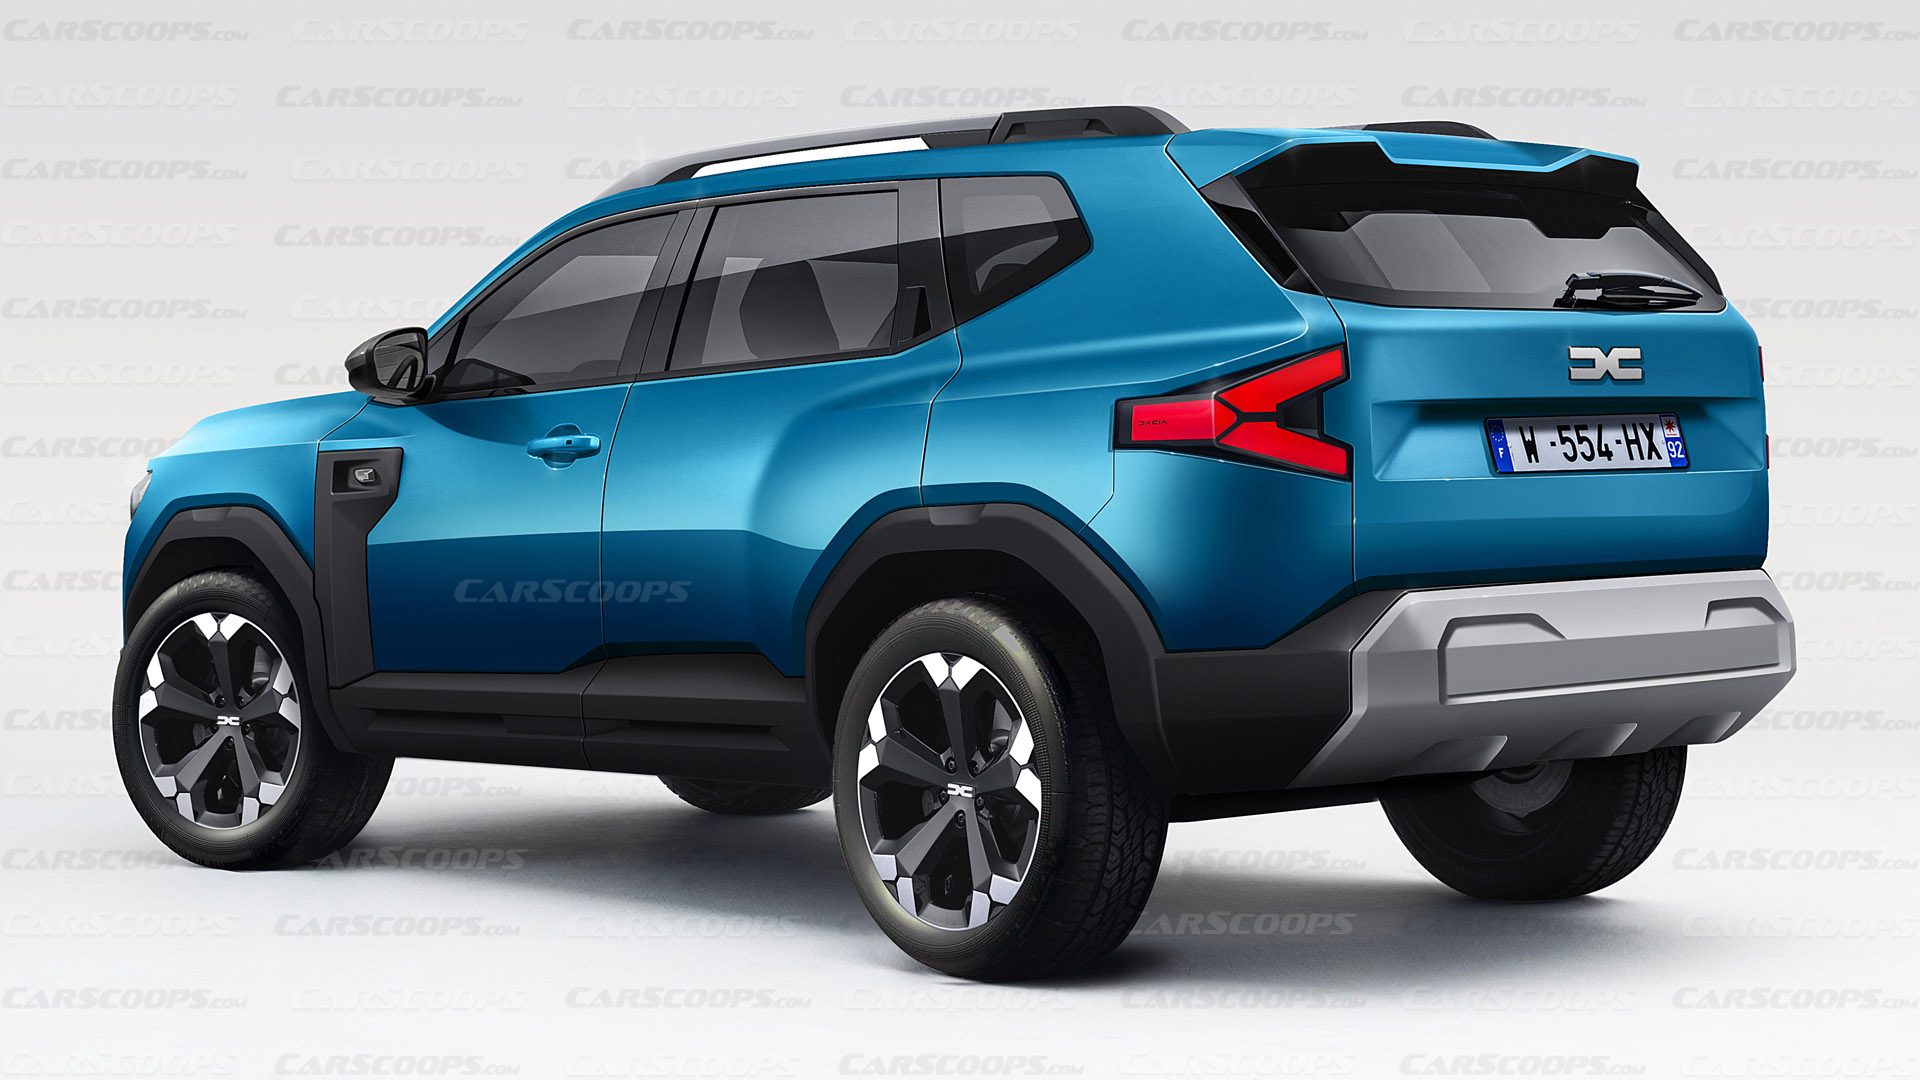 2024 Dacia Duster Pickup Truck Rendered, Base Spec and 3-Door SUV